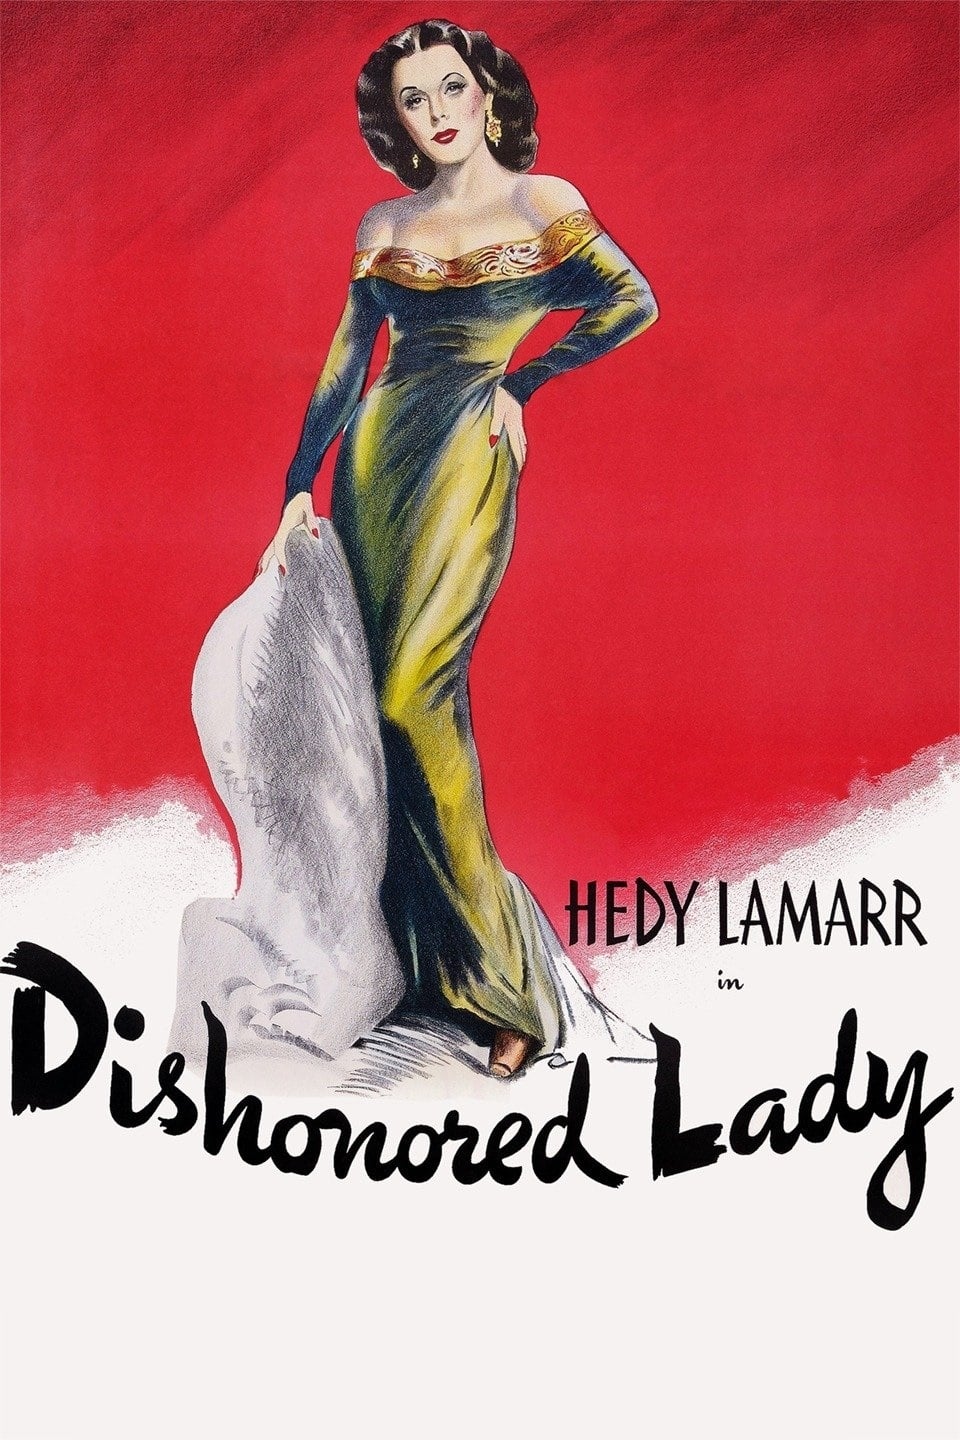 Dishonored Lady on FREECABLE TV